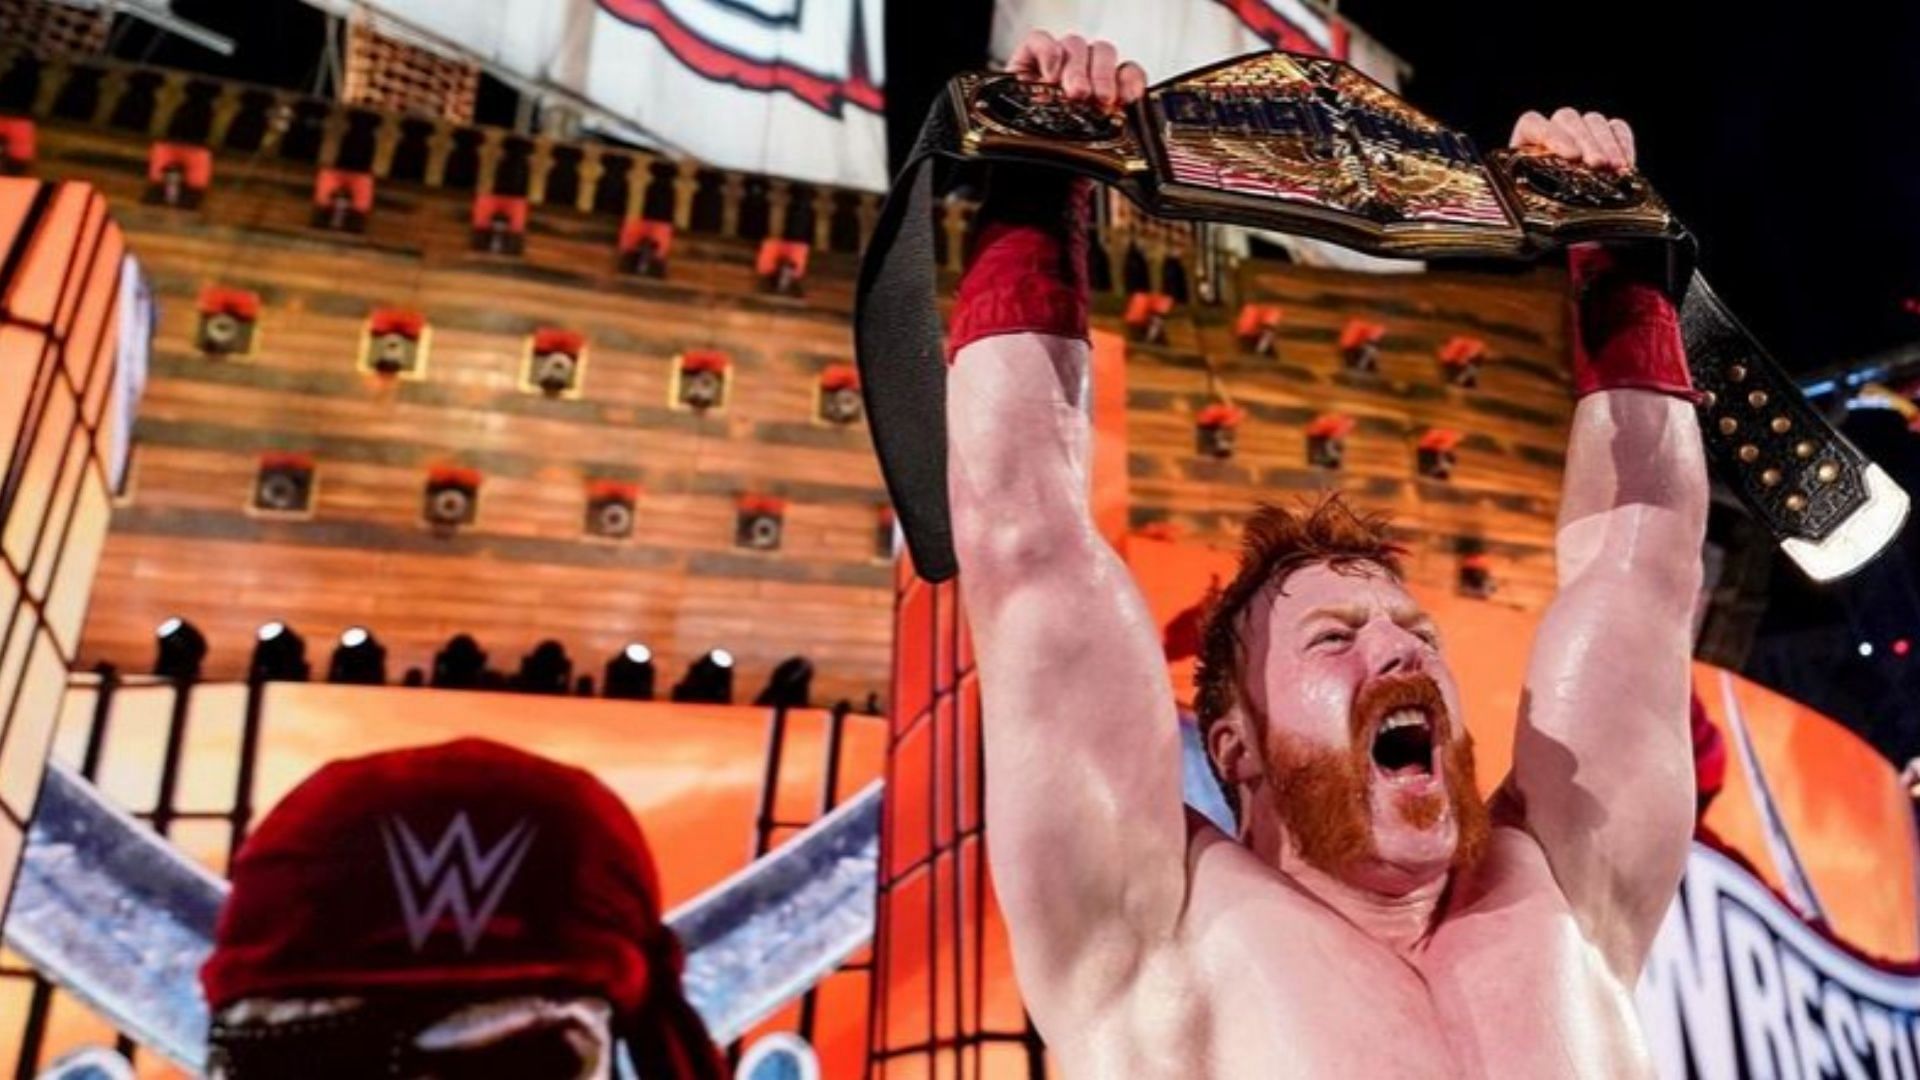 Sheamus poses with the United States Championship after winning it at WrestleMania 37.